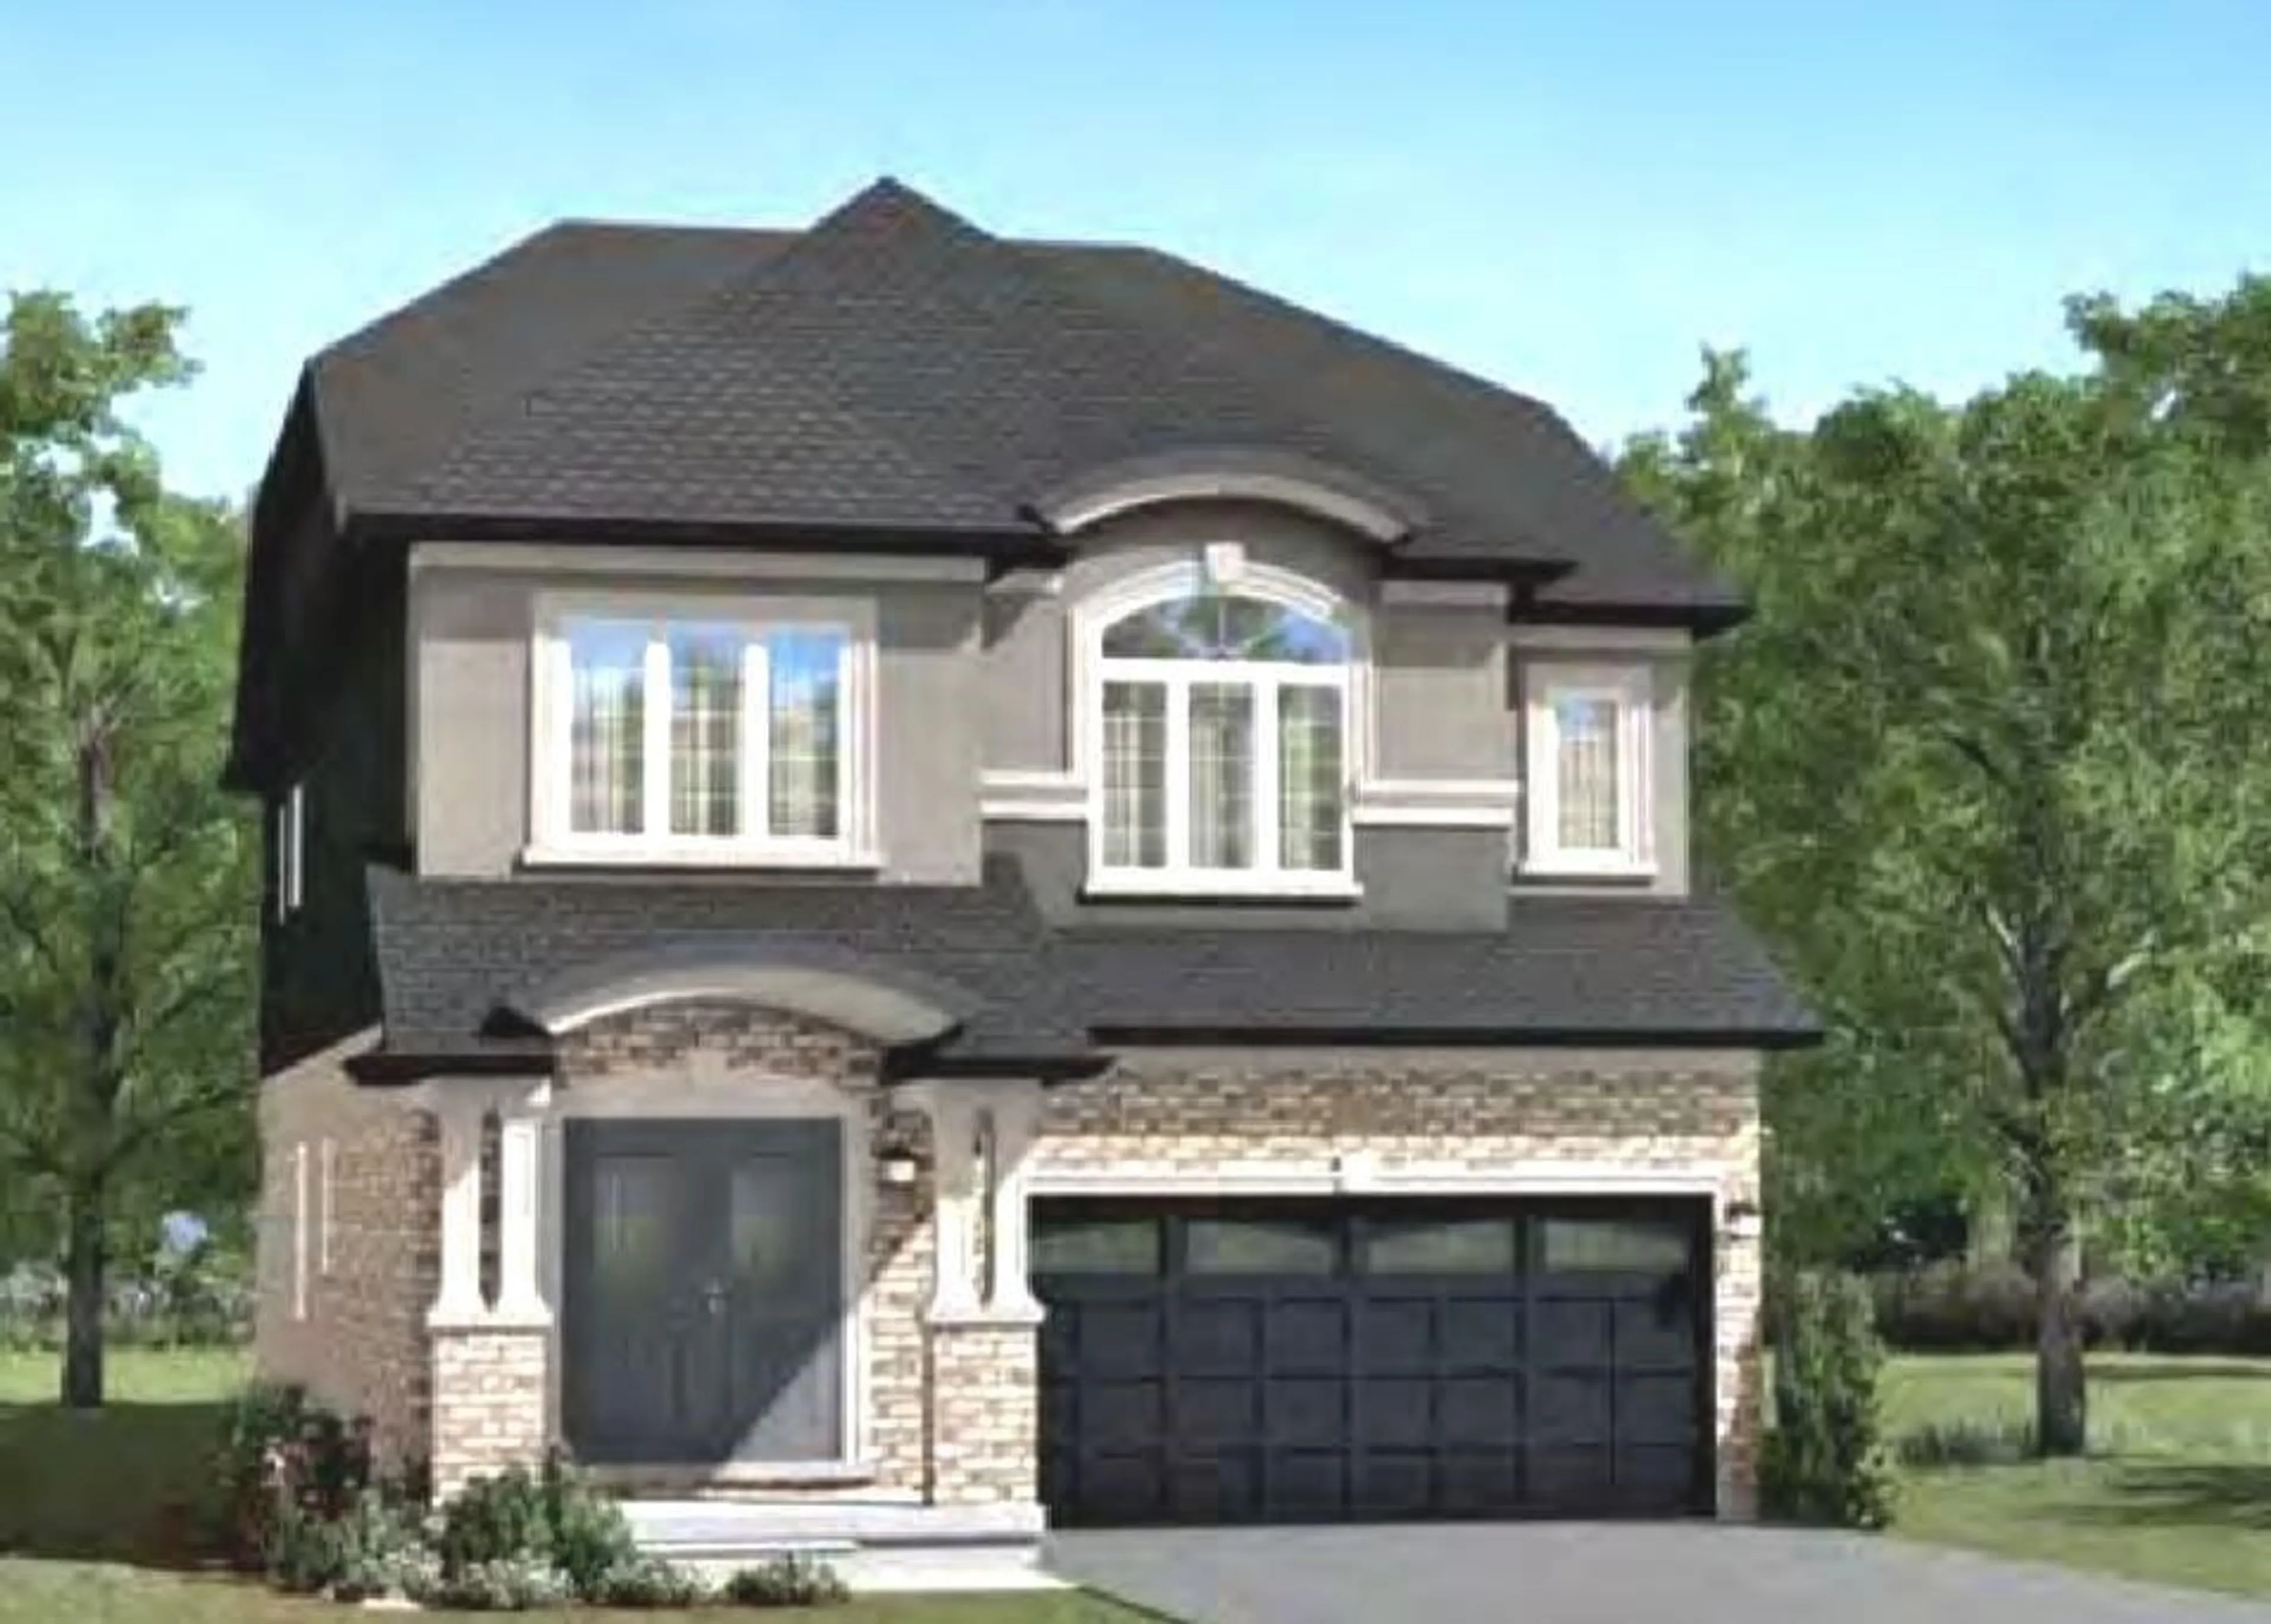 Frontside or backside of a home for LOT 279 Street, Paris Ontario L9L 9L9